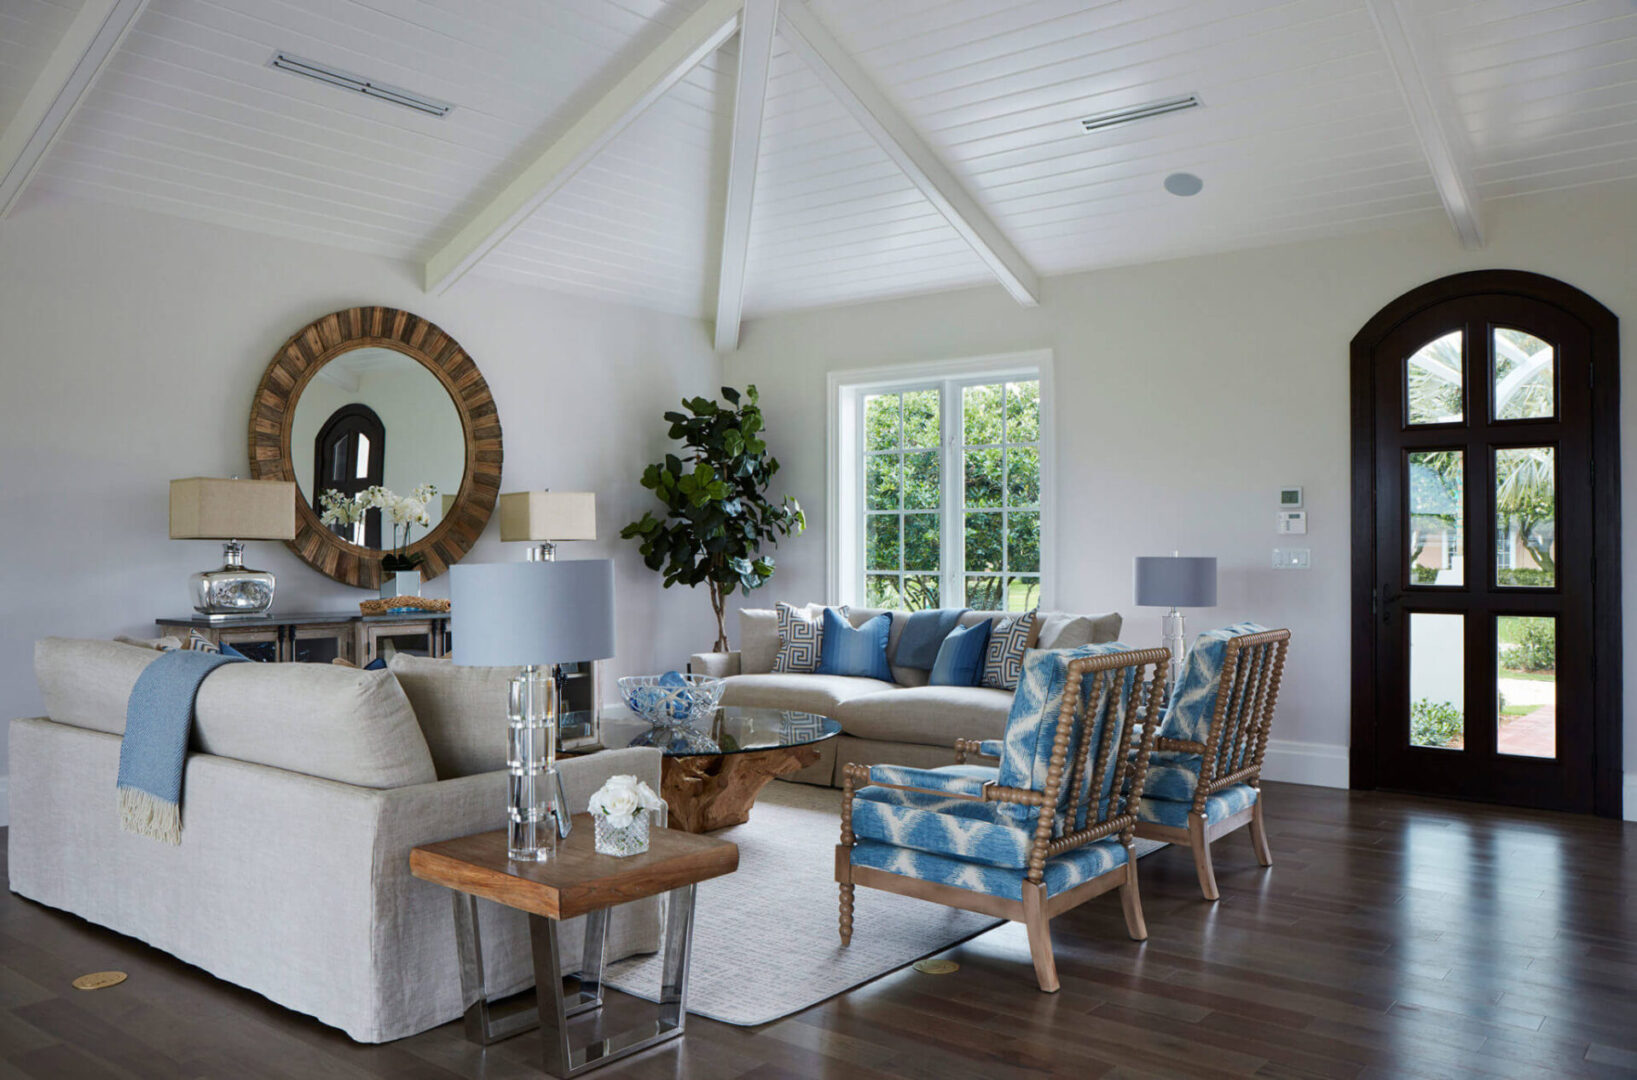 A living room with white furniture and blue accents.